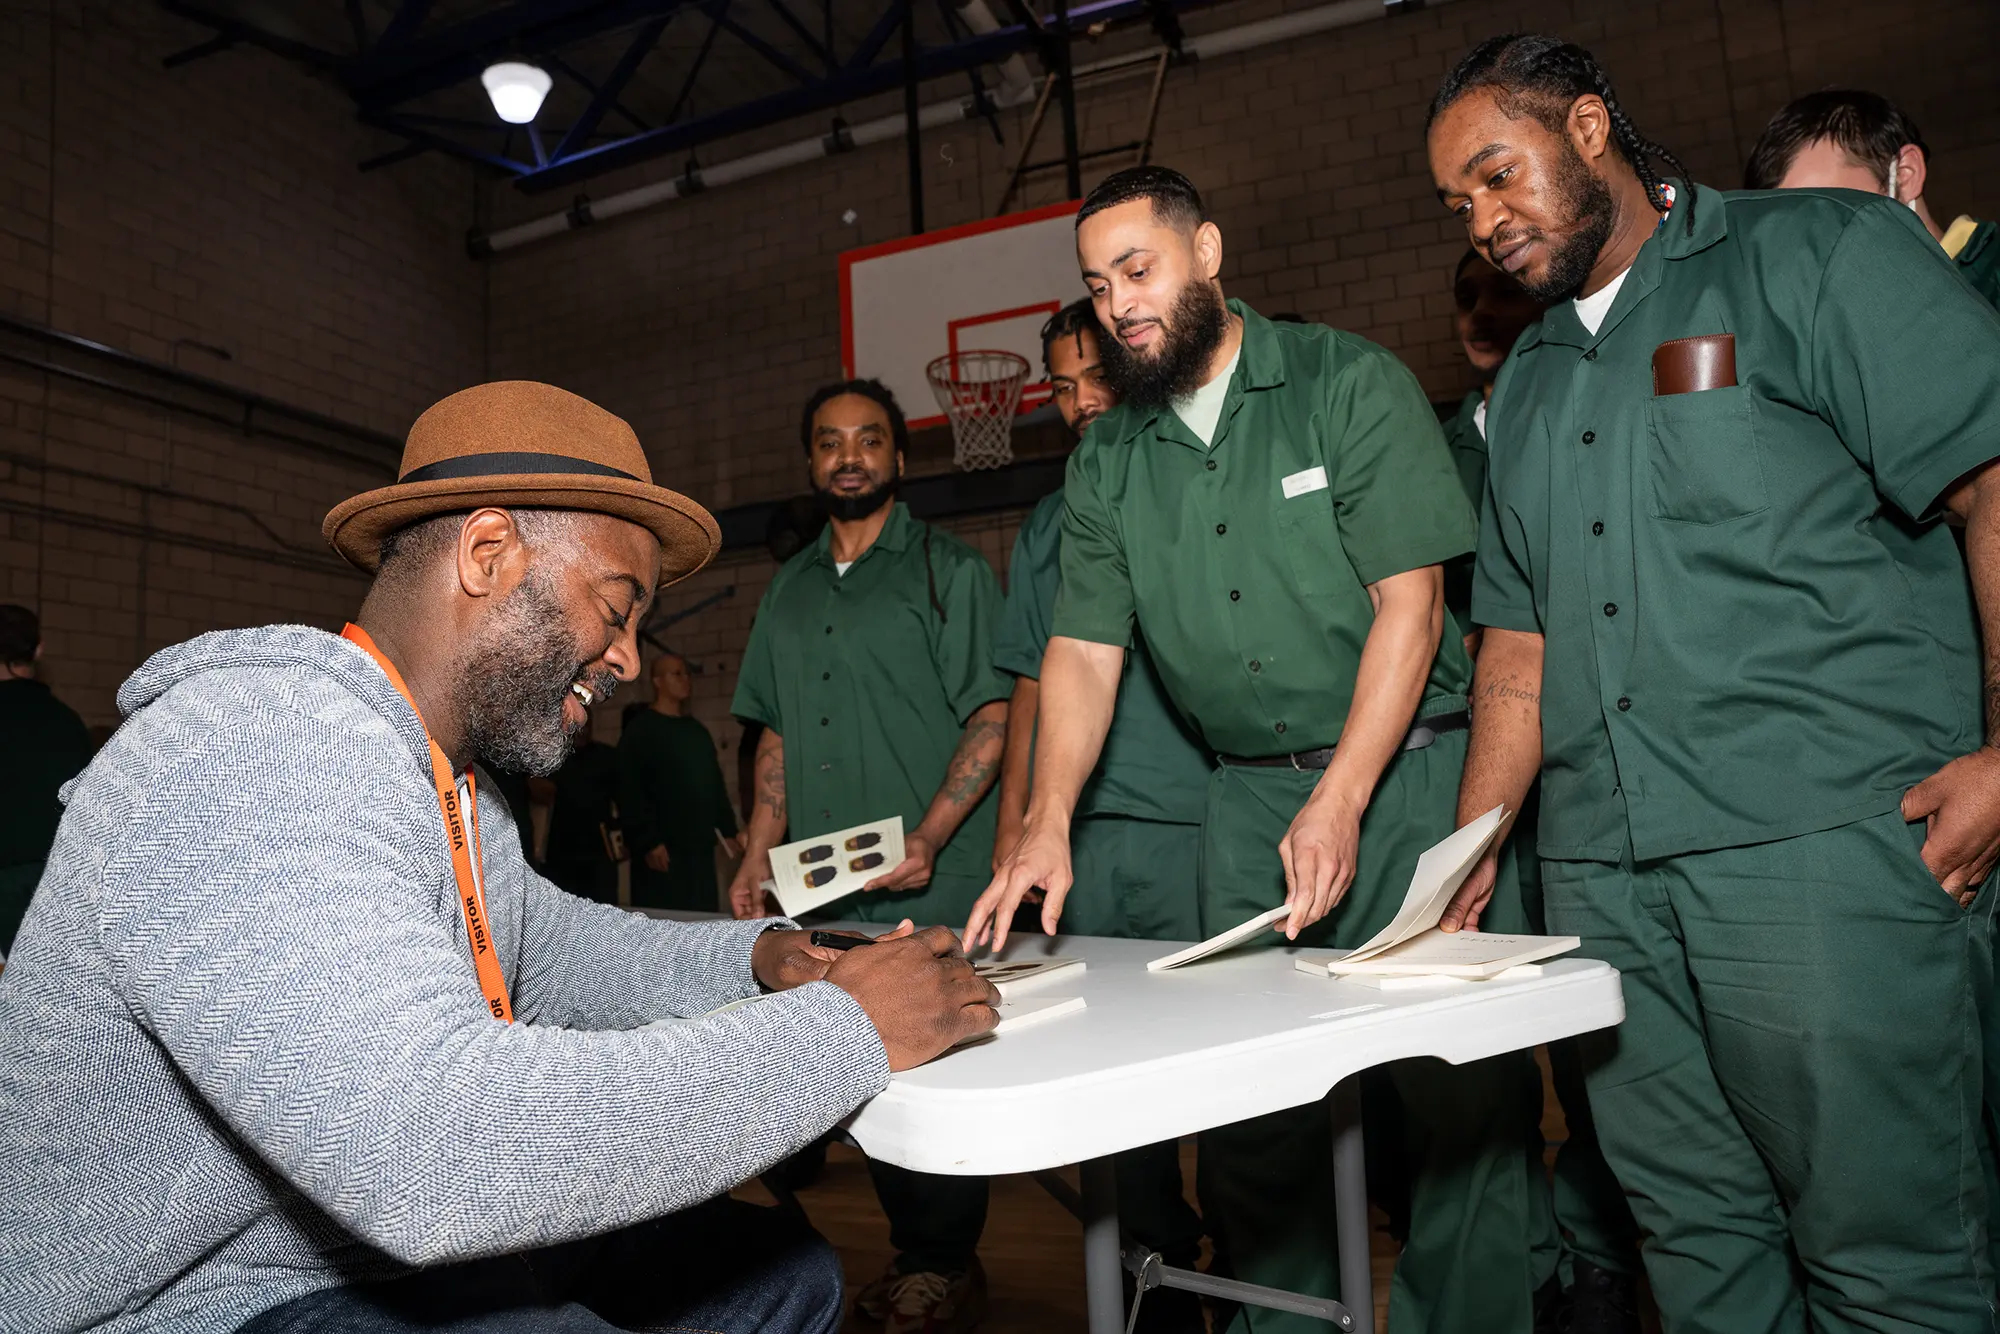 Reginald Dwayne Betts smiles while signing copies of his book, FELON, for men lining up to meet him at Woodbourne Correctional Facility in New York.